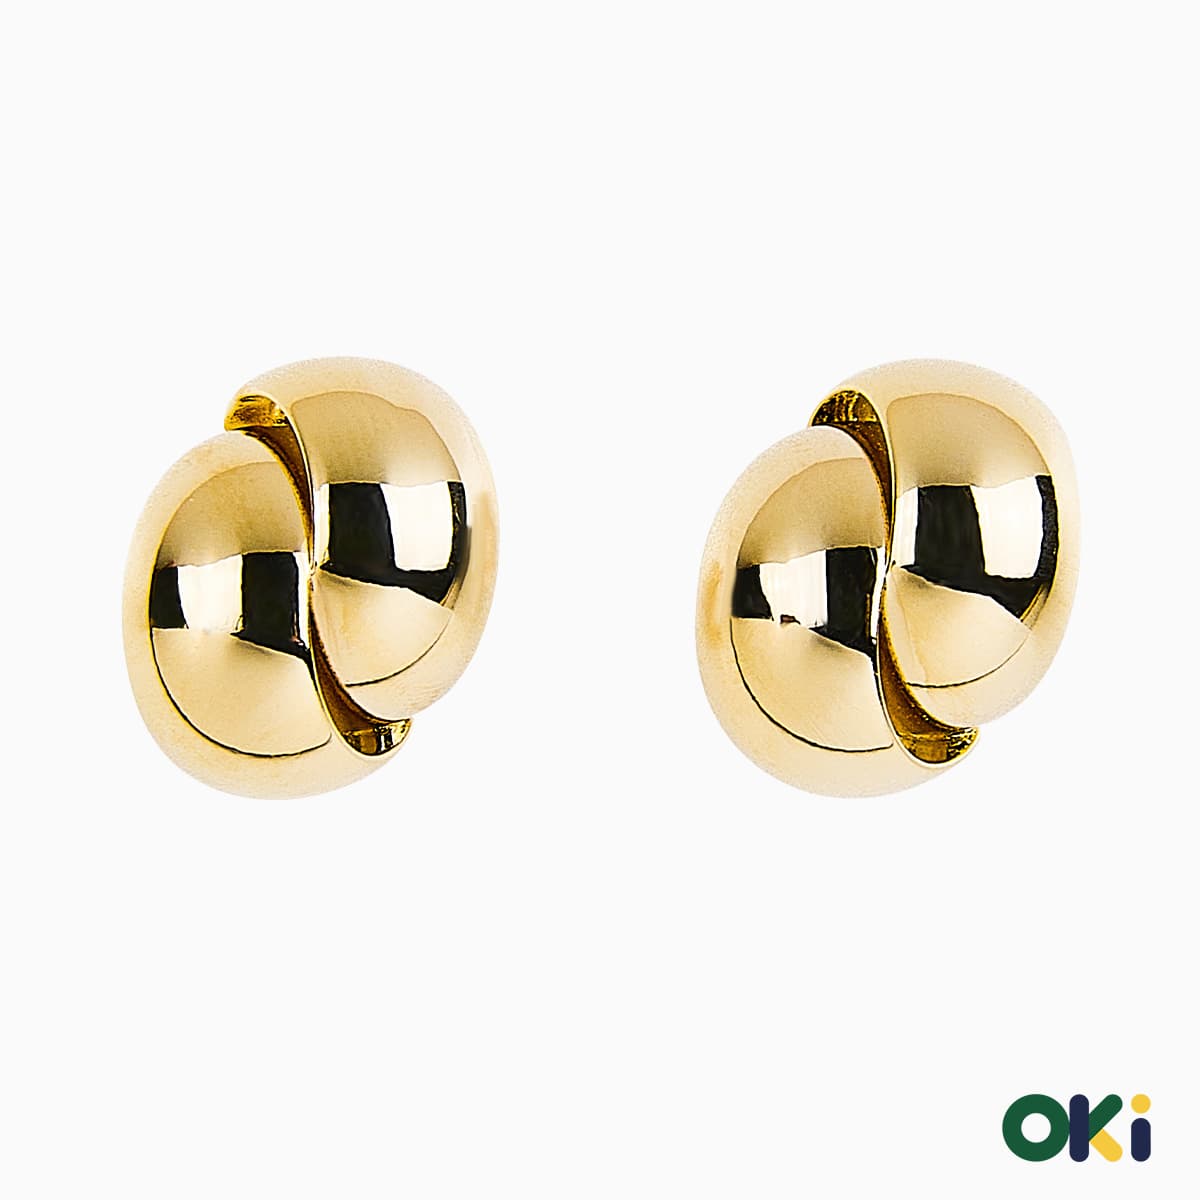 Or earrings OKi Fashion accessories jewely hypoallergenic